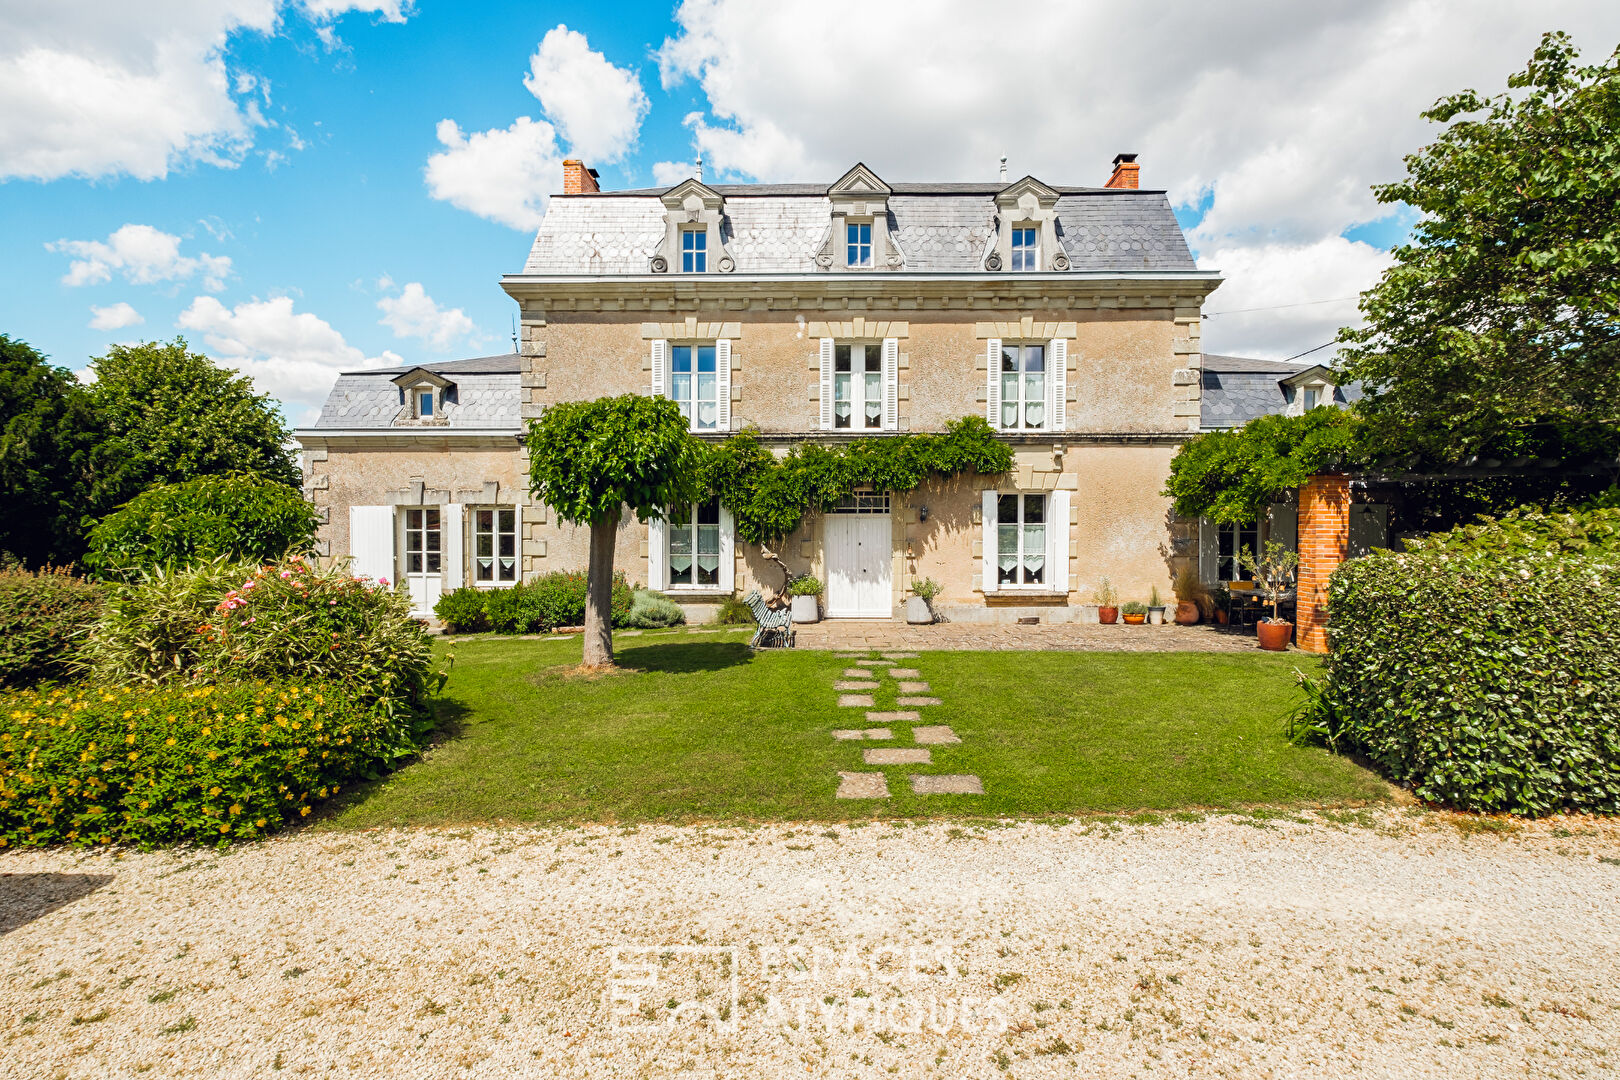 Exceptional property: gîtes and guest rooms in a bucolic environment